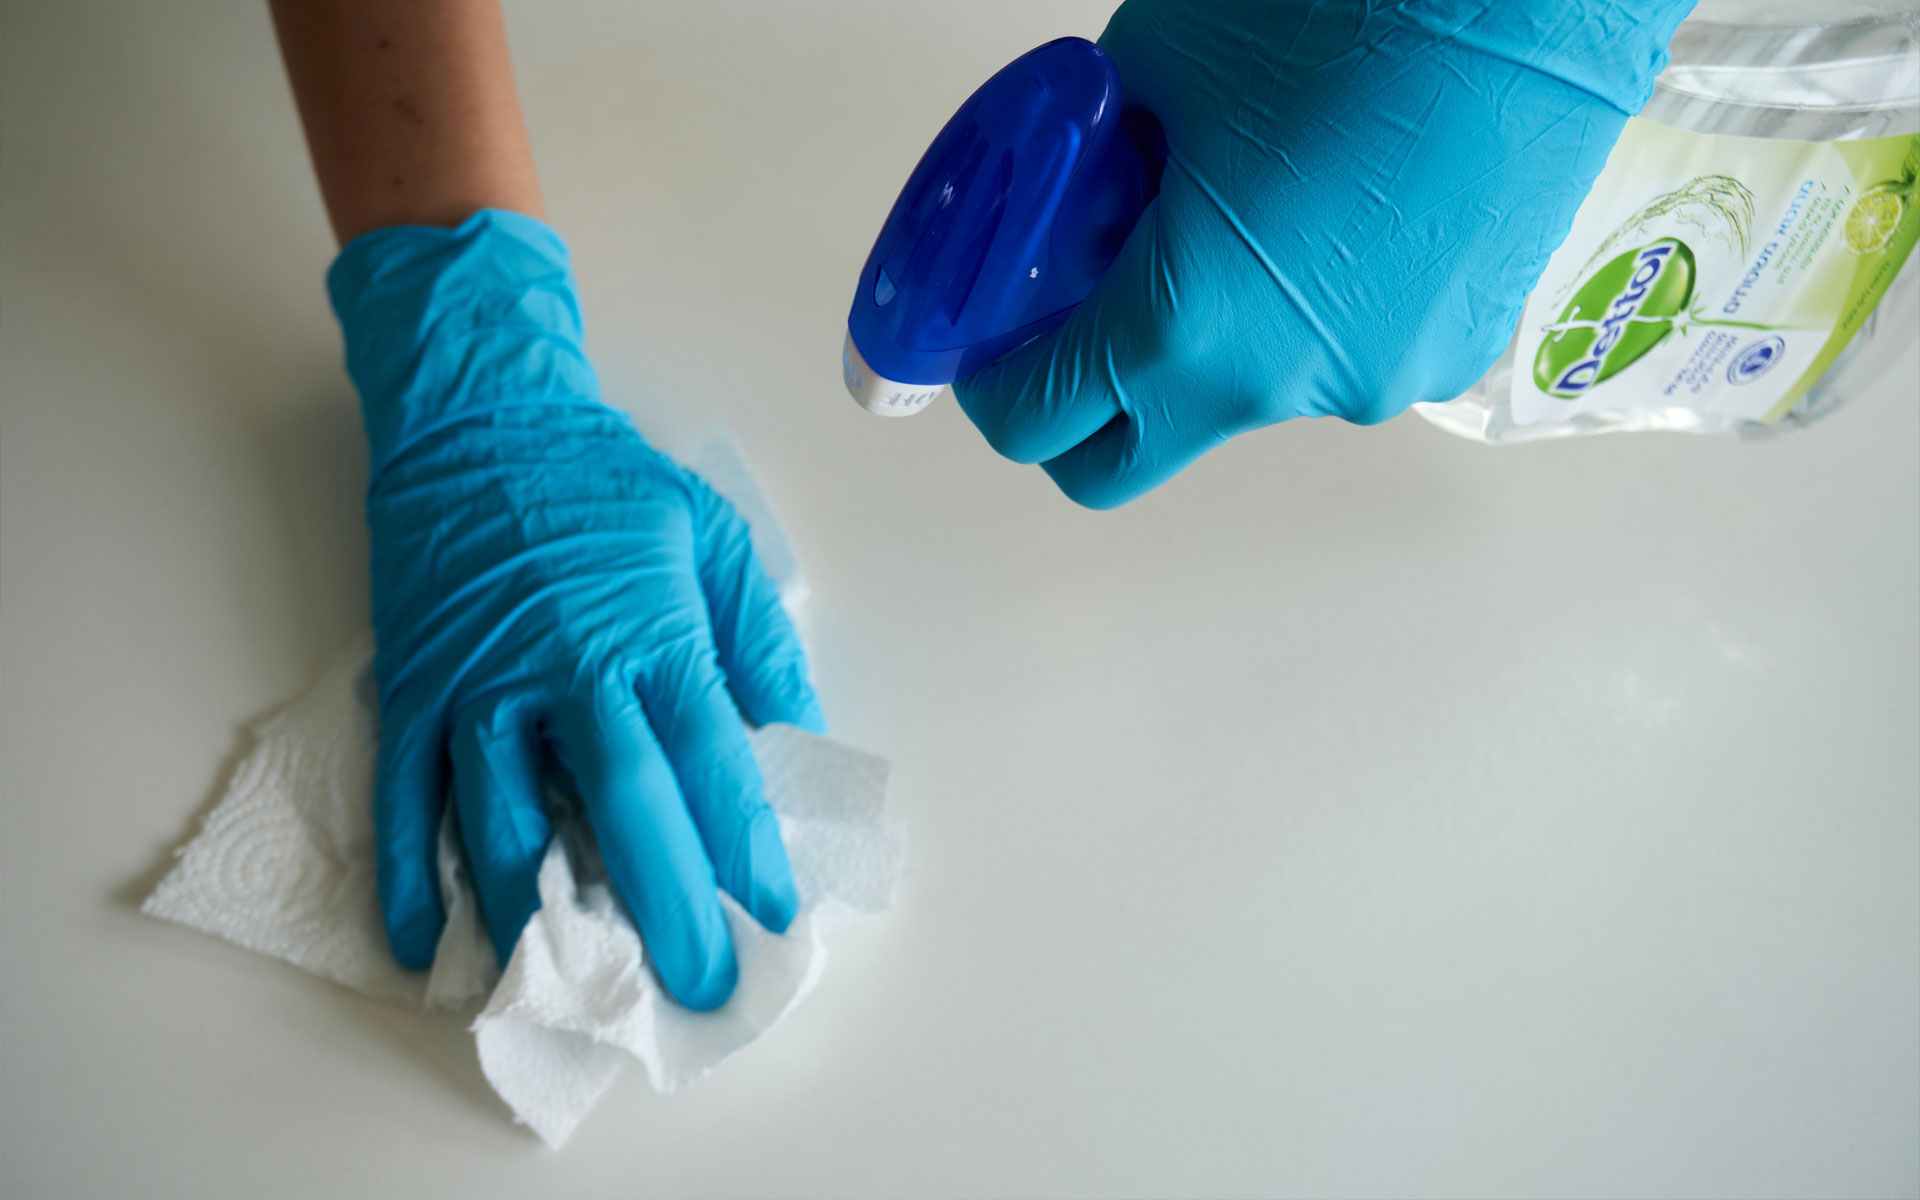 Office cleaners can help maintain a healthy, clean work environment.